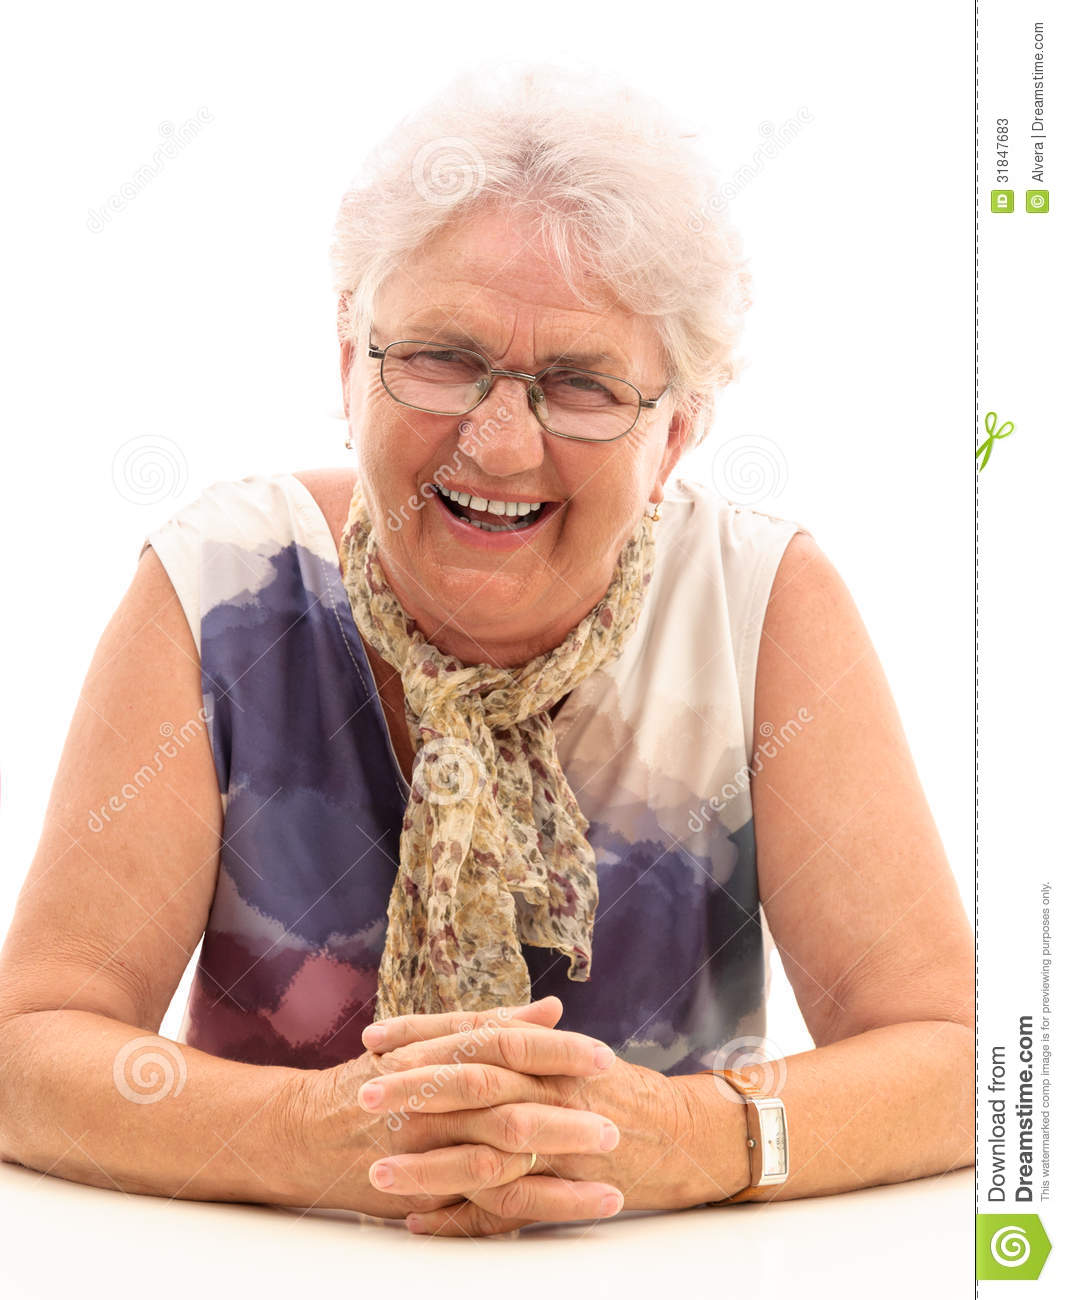 Old Woman Laughing